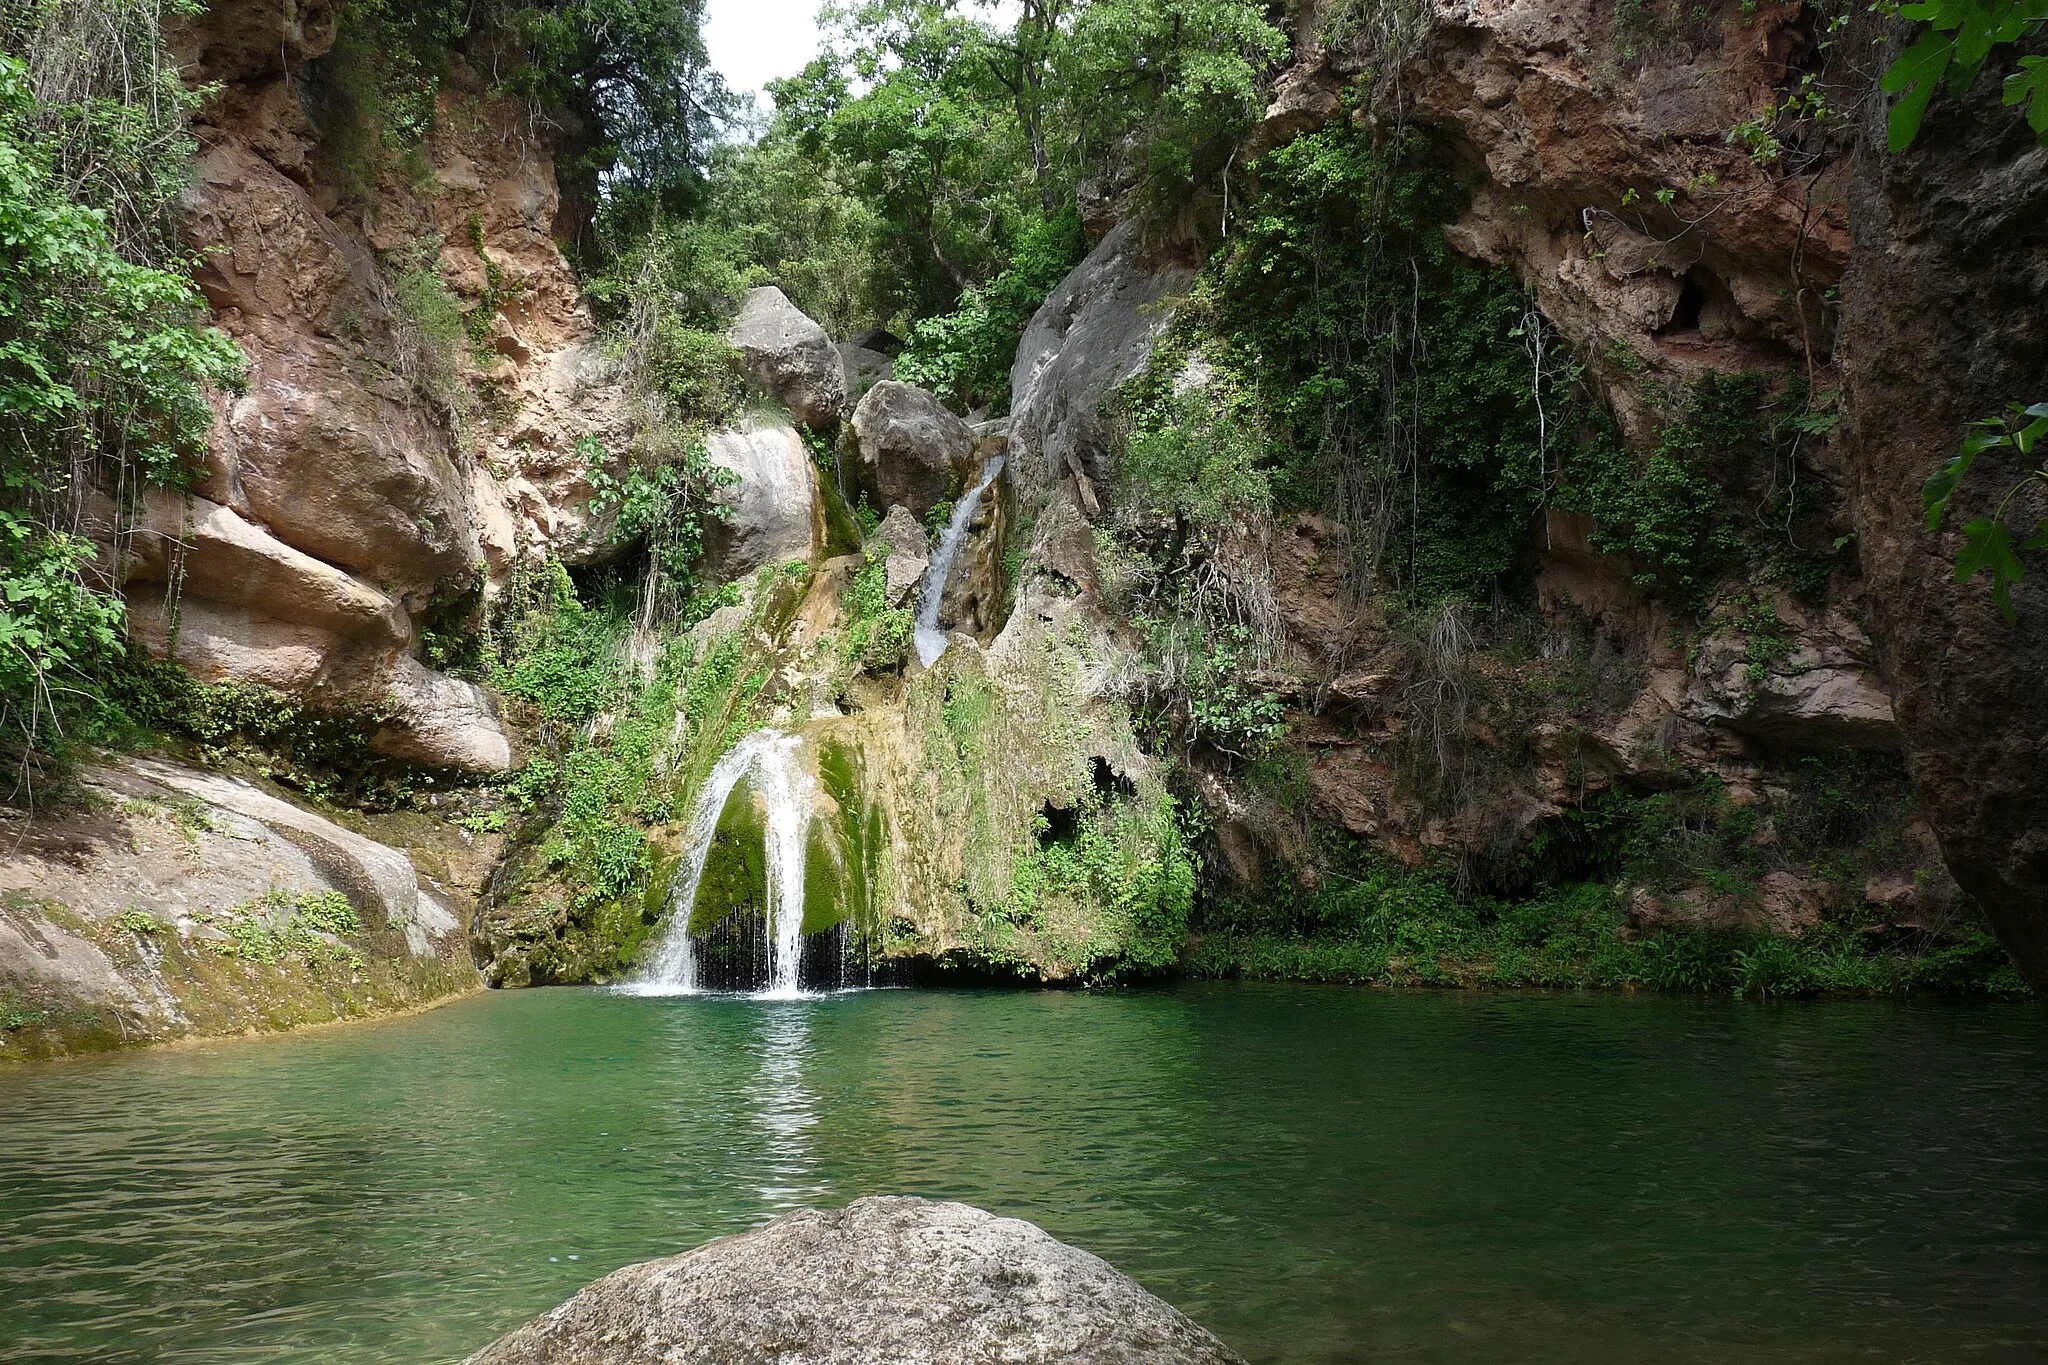 Photo showing: The pool of the Niu de l'Àliga (Nest of the Eagle) in the Glorieta river, Alcover